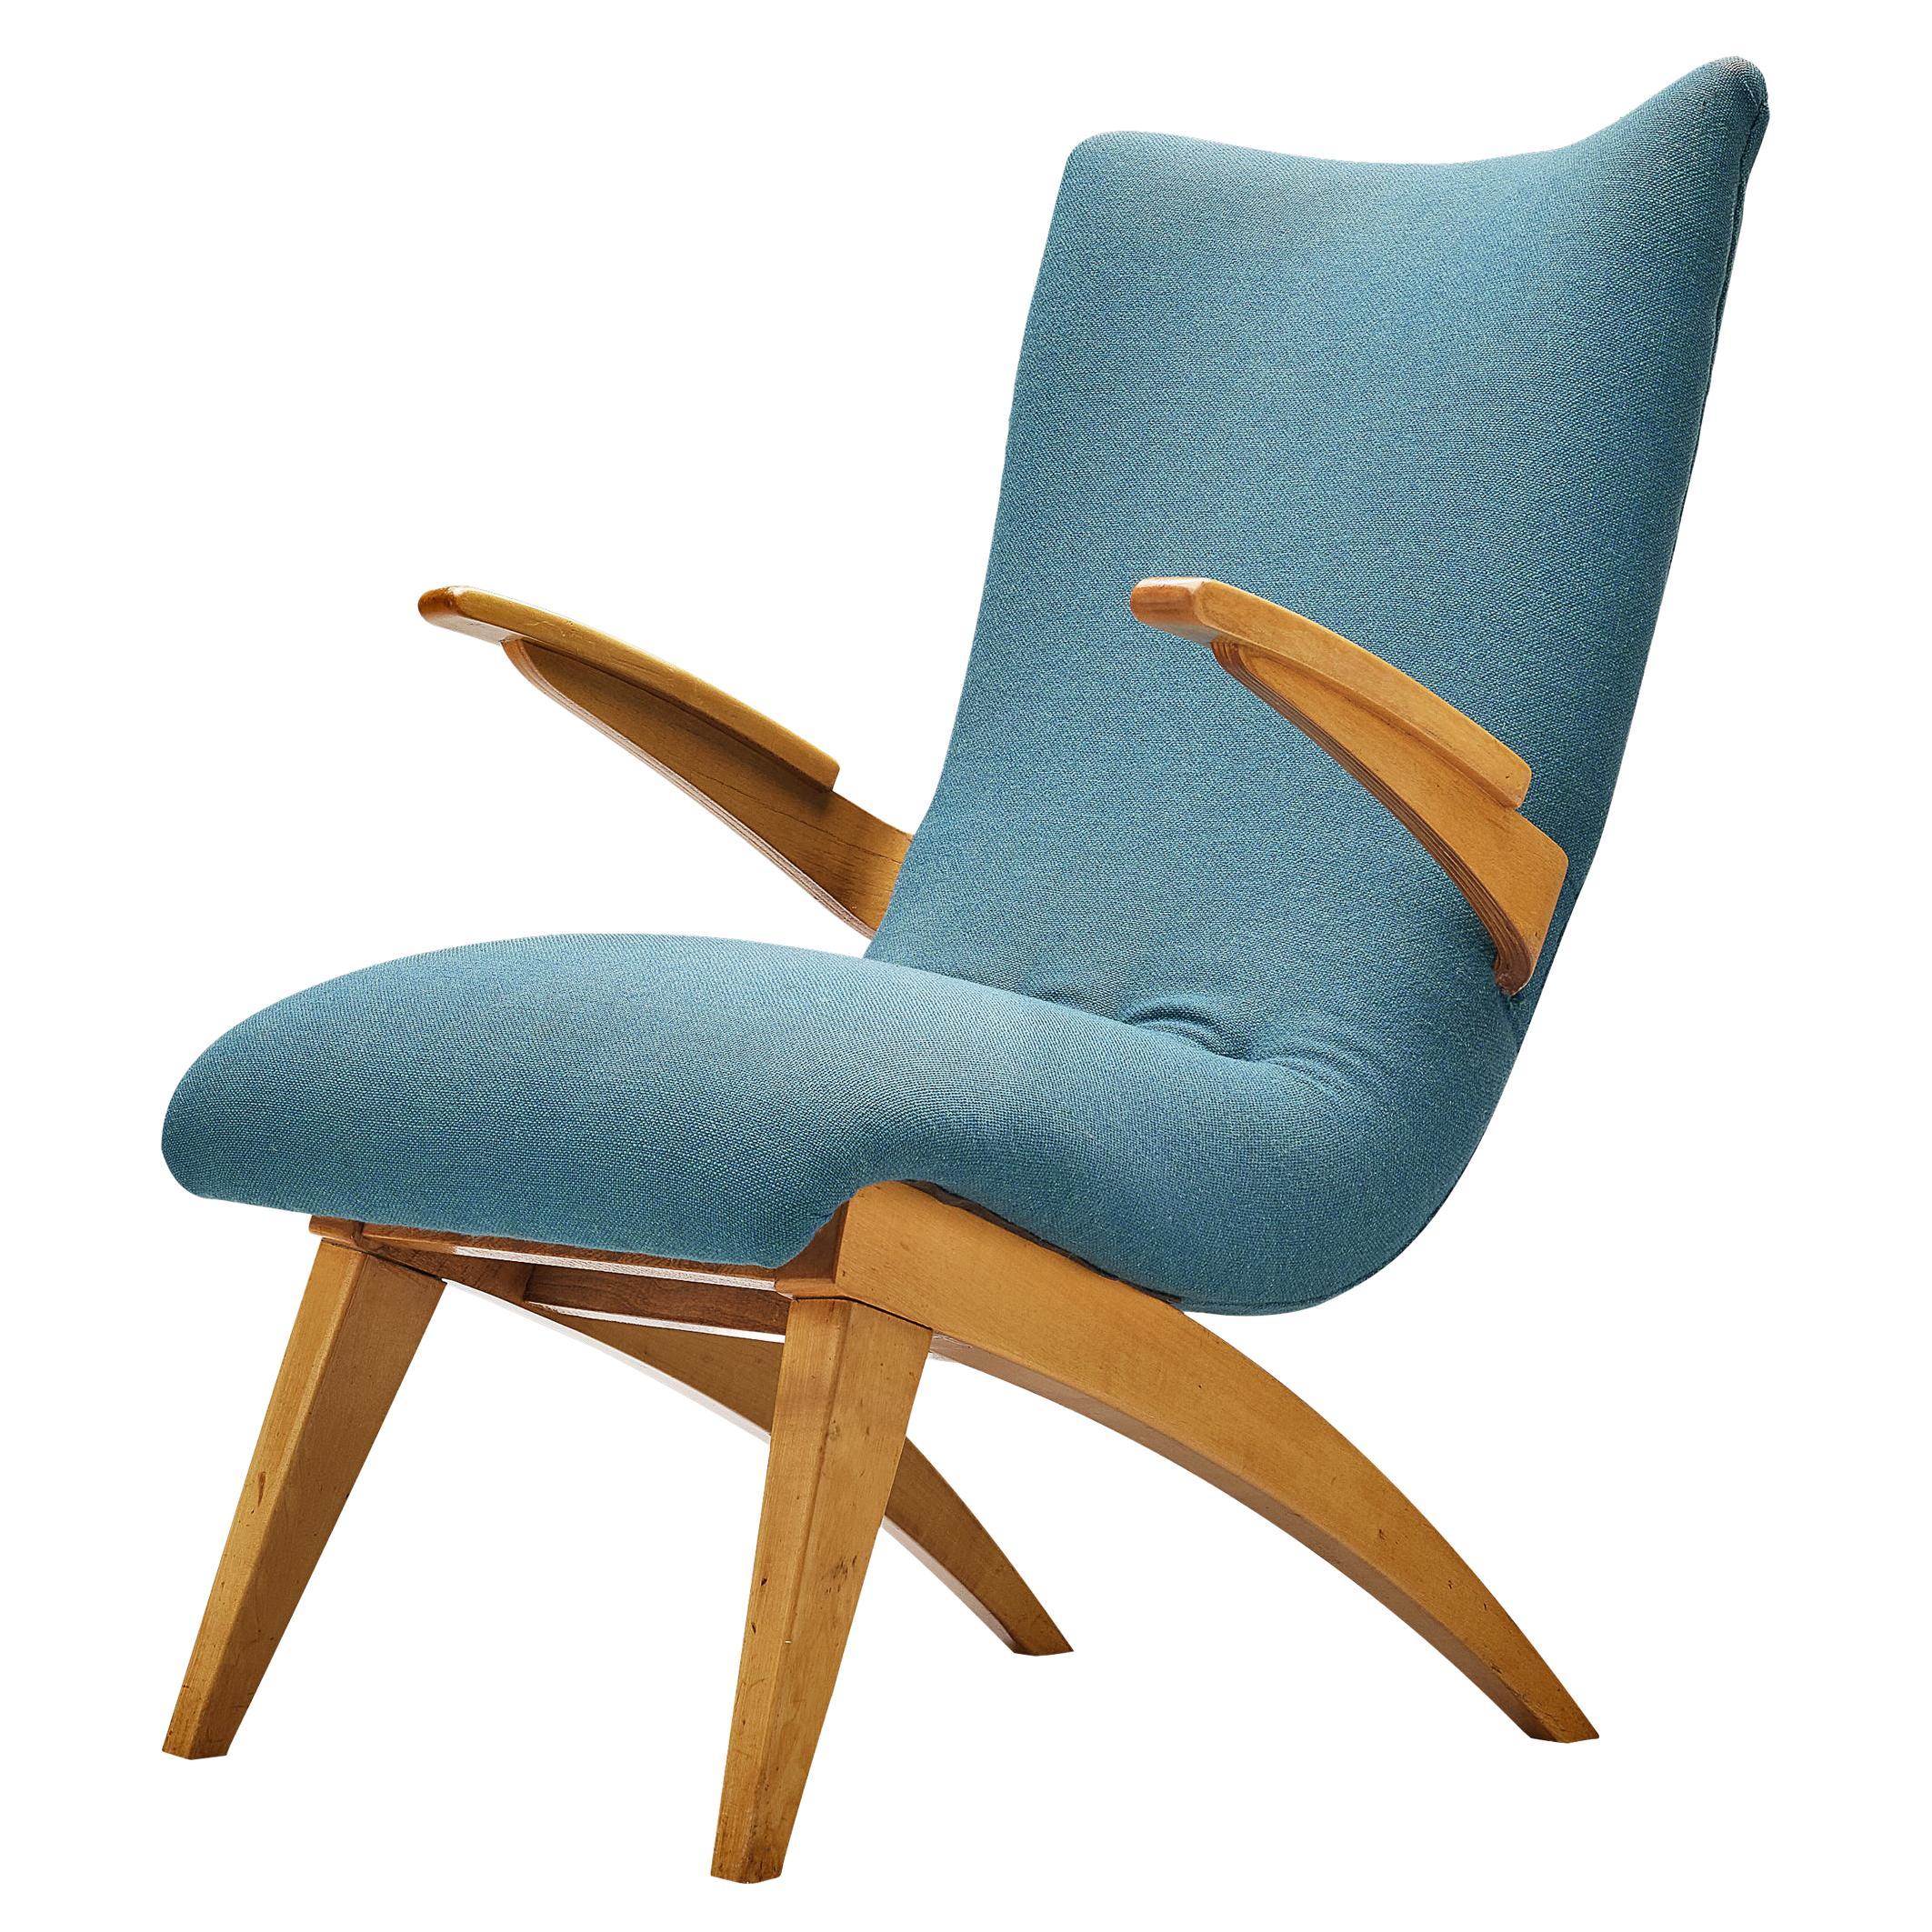 Van Os Culemborg Lounge Chair in Fabric Upholstery